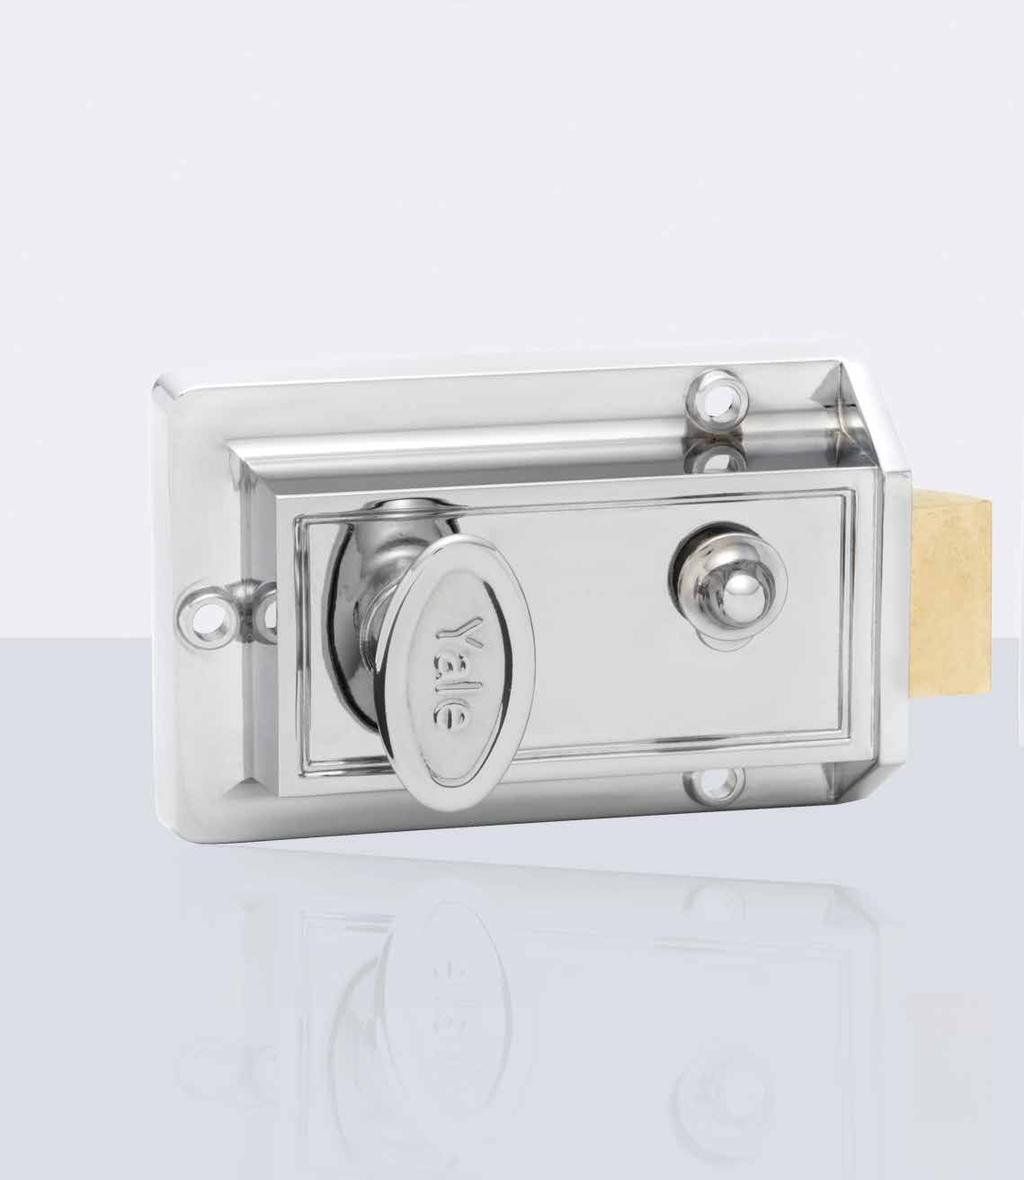 YALE NIGHTLATCHES AND DEADLOCKS Rimlocks that have been manufactured according to stringent quality